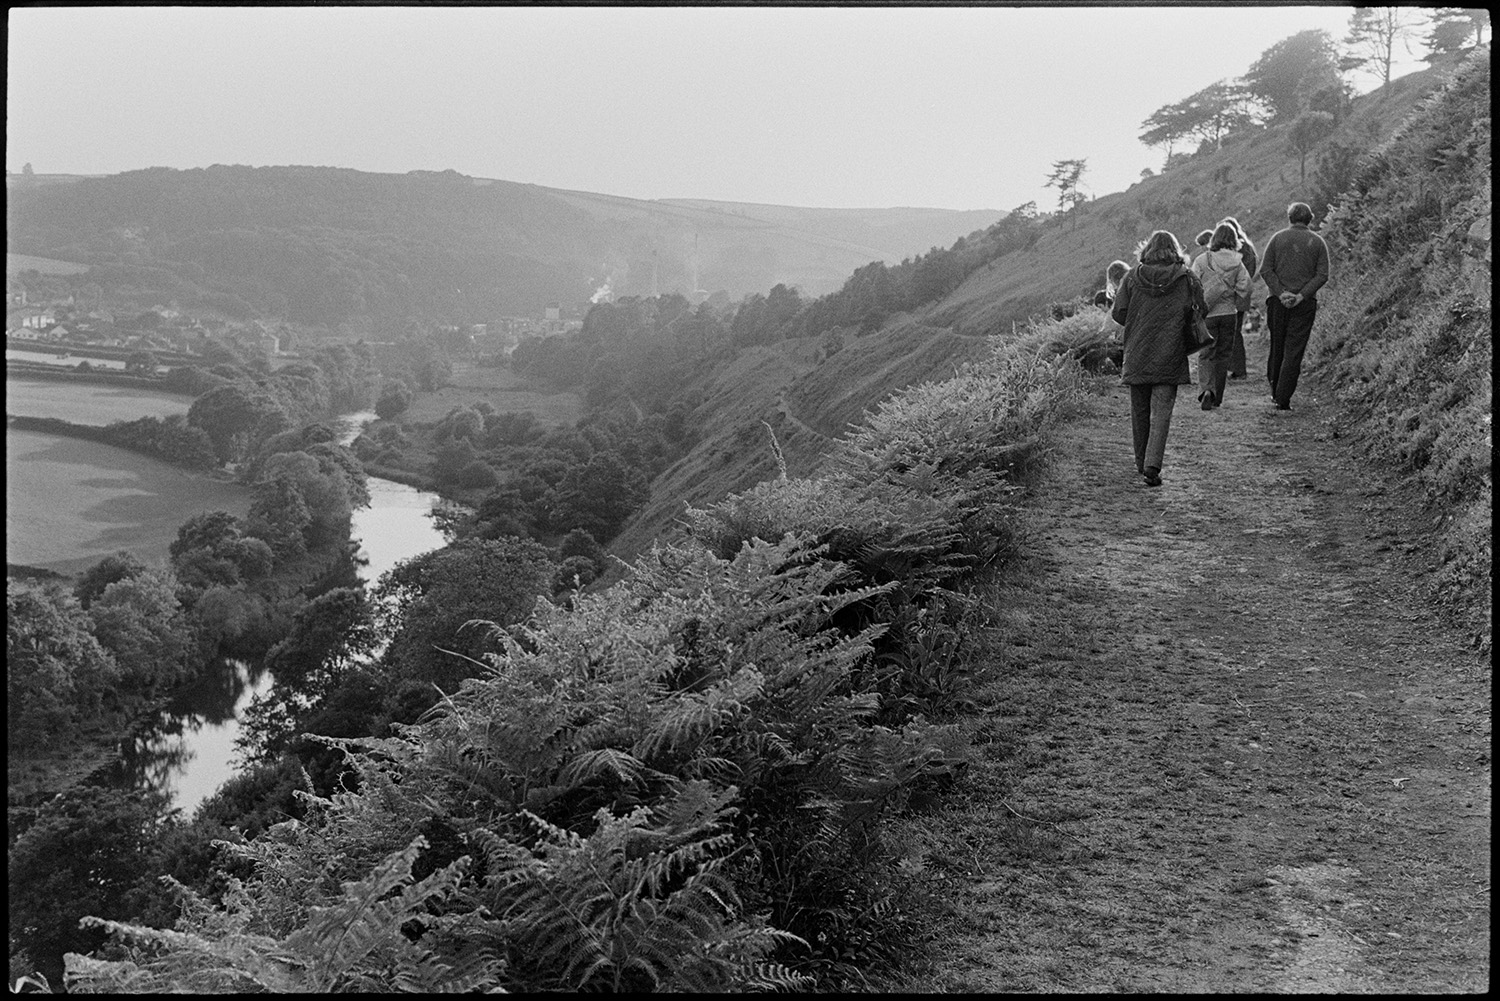 Landscape with river and bales waiting to be collected from distant fields, walkers on path. 
[People walking along a path, possibly at Castle Hill Park, in Torrington. The River Torridge can be seen in the valley below, running past fields.]